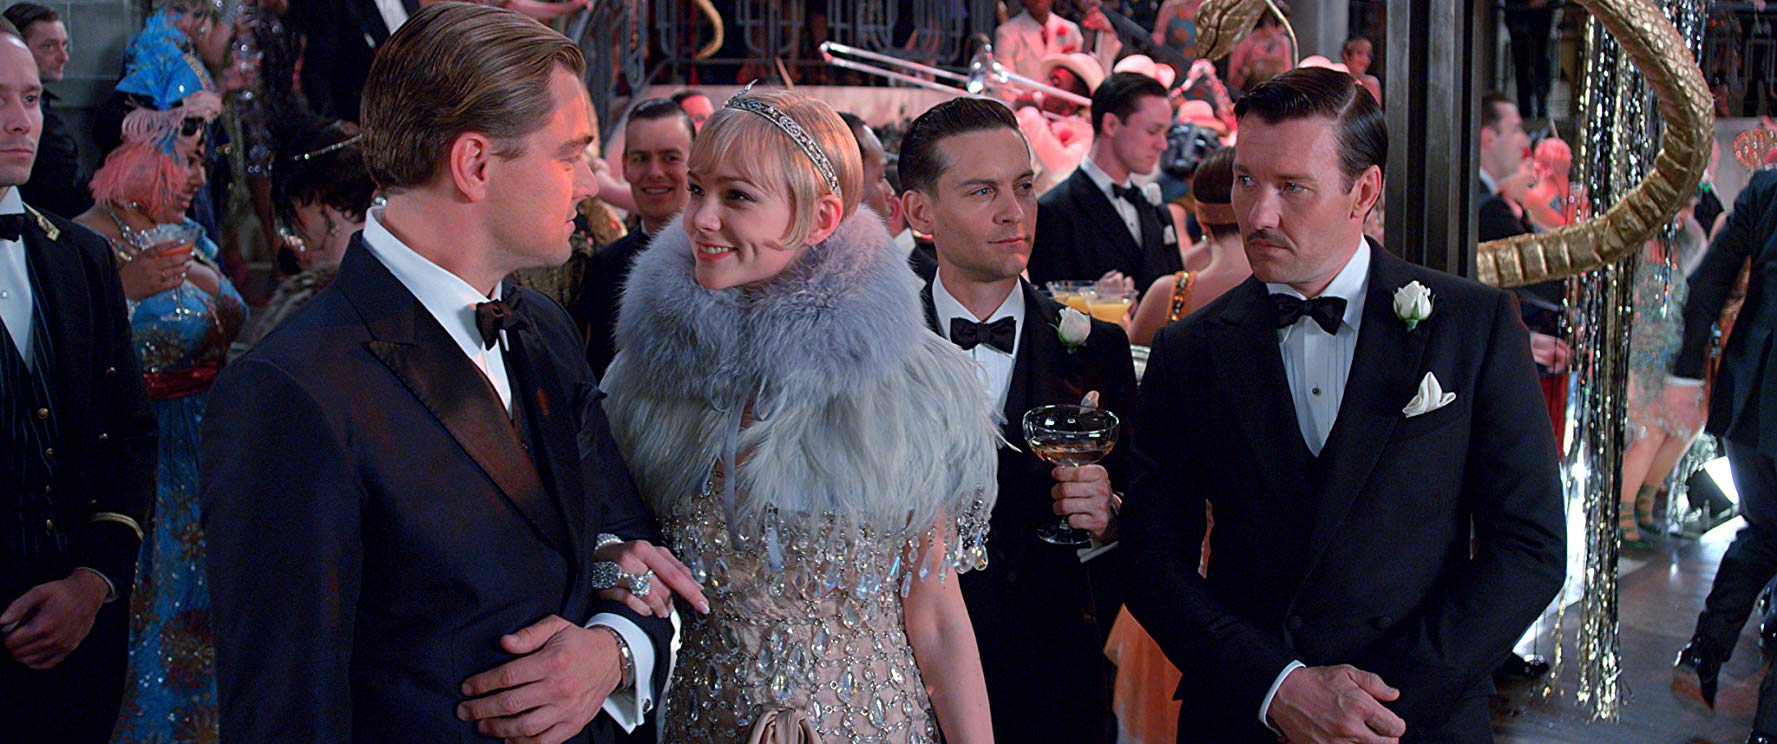 The Great Gatsby Costumes